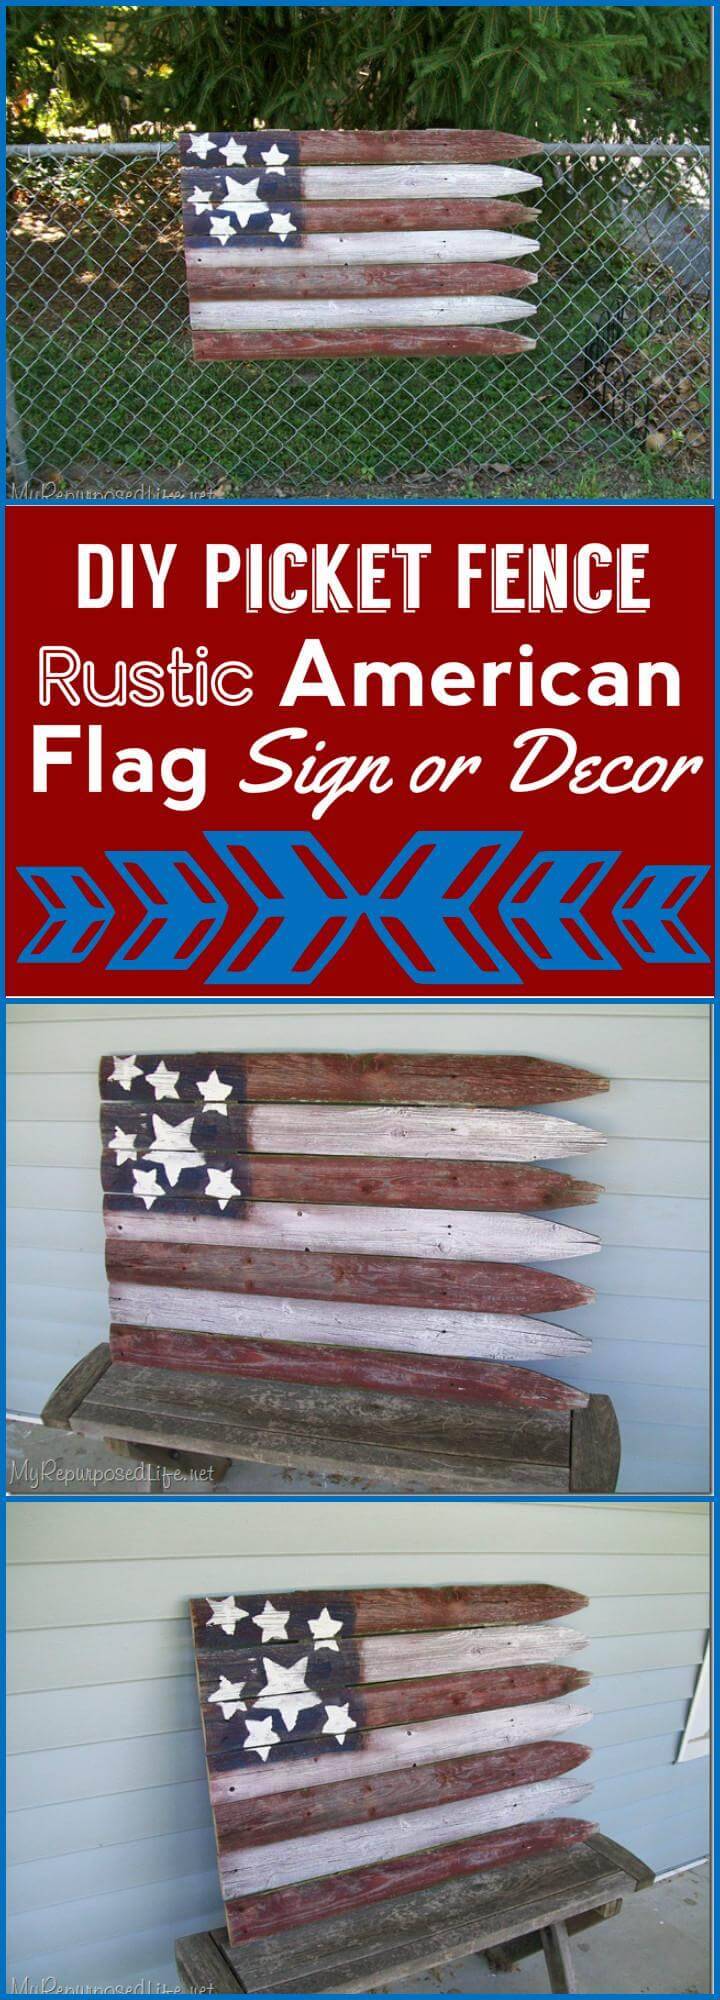 DIY picket fence rustic American flag sign or decor